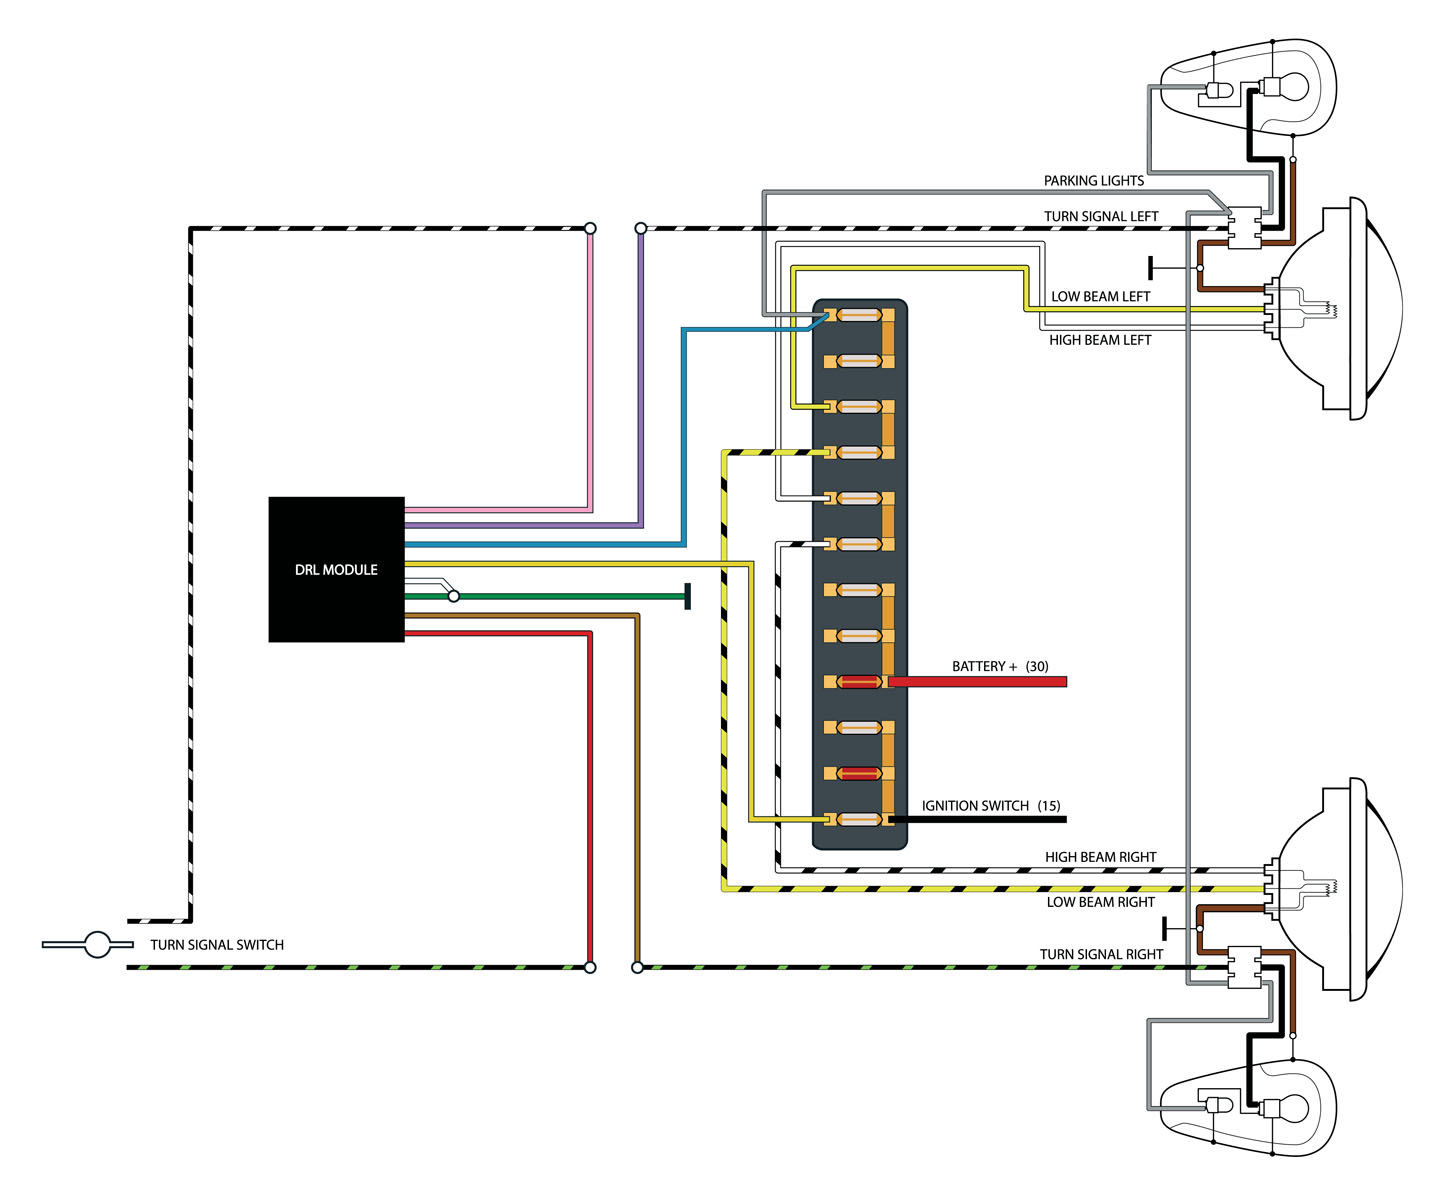 TheSamba.com :: Gallery - WebElectricProducts DRL Module Wiring Diagram